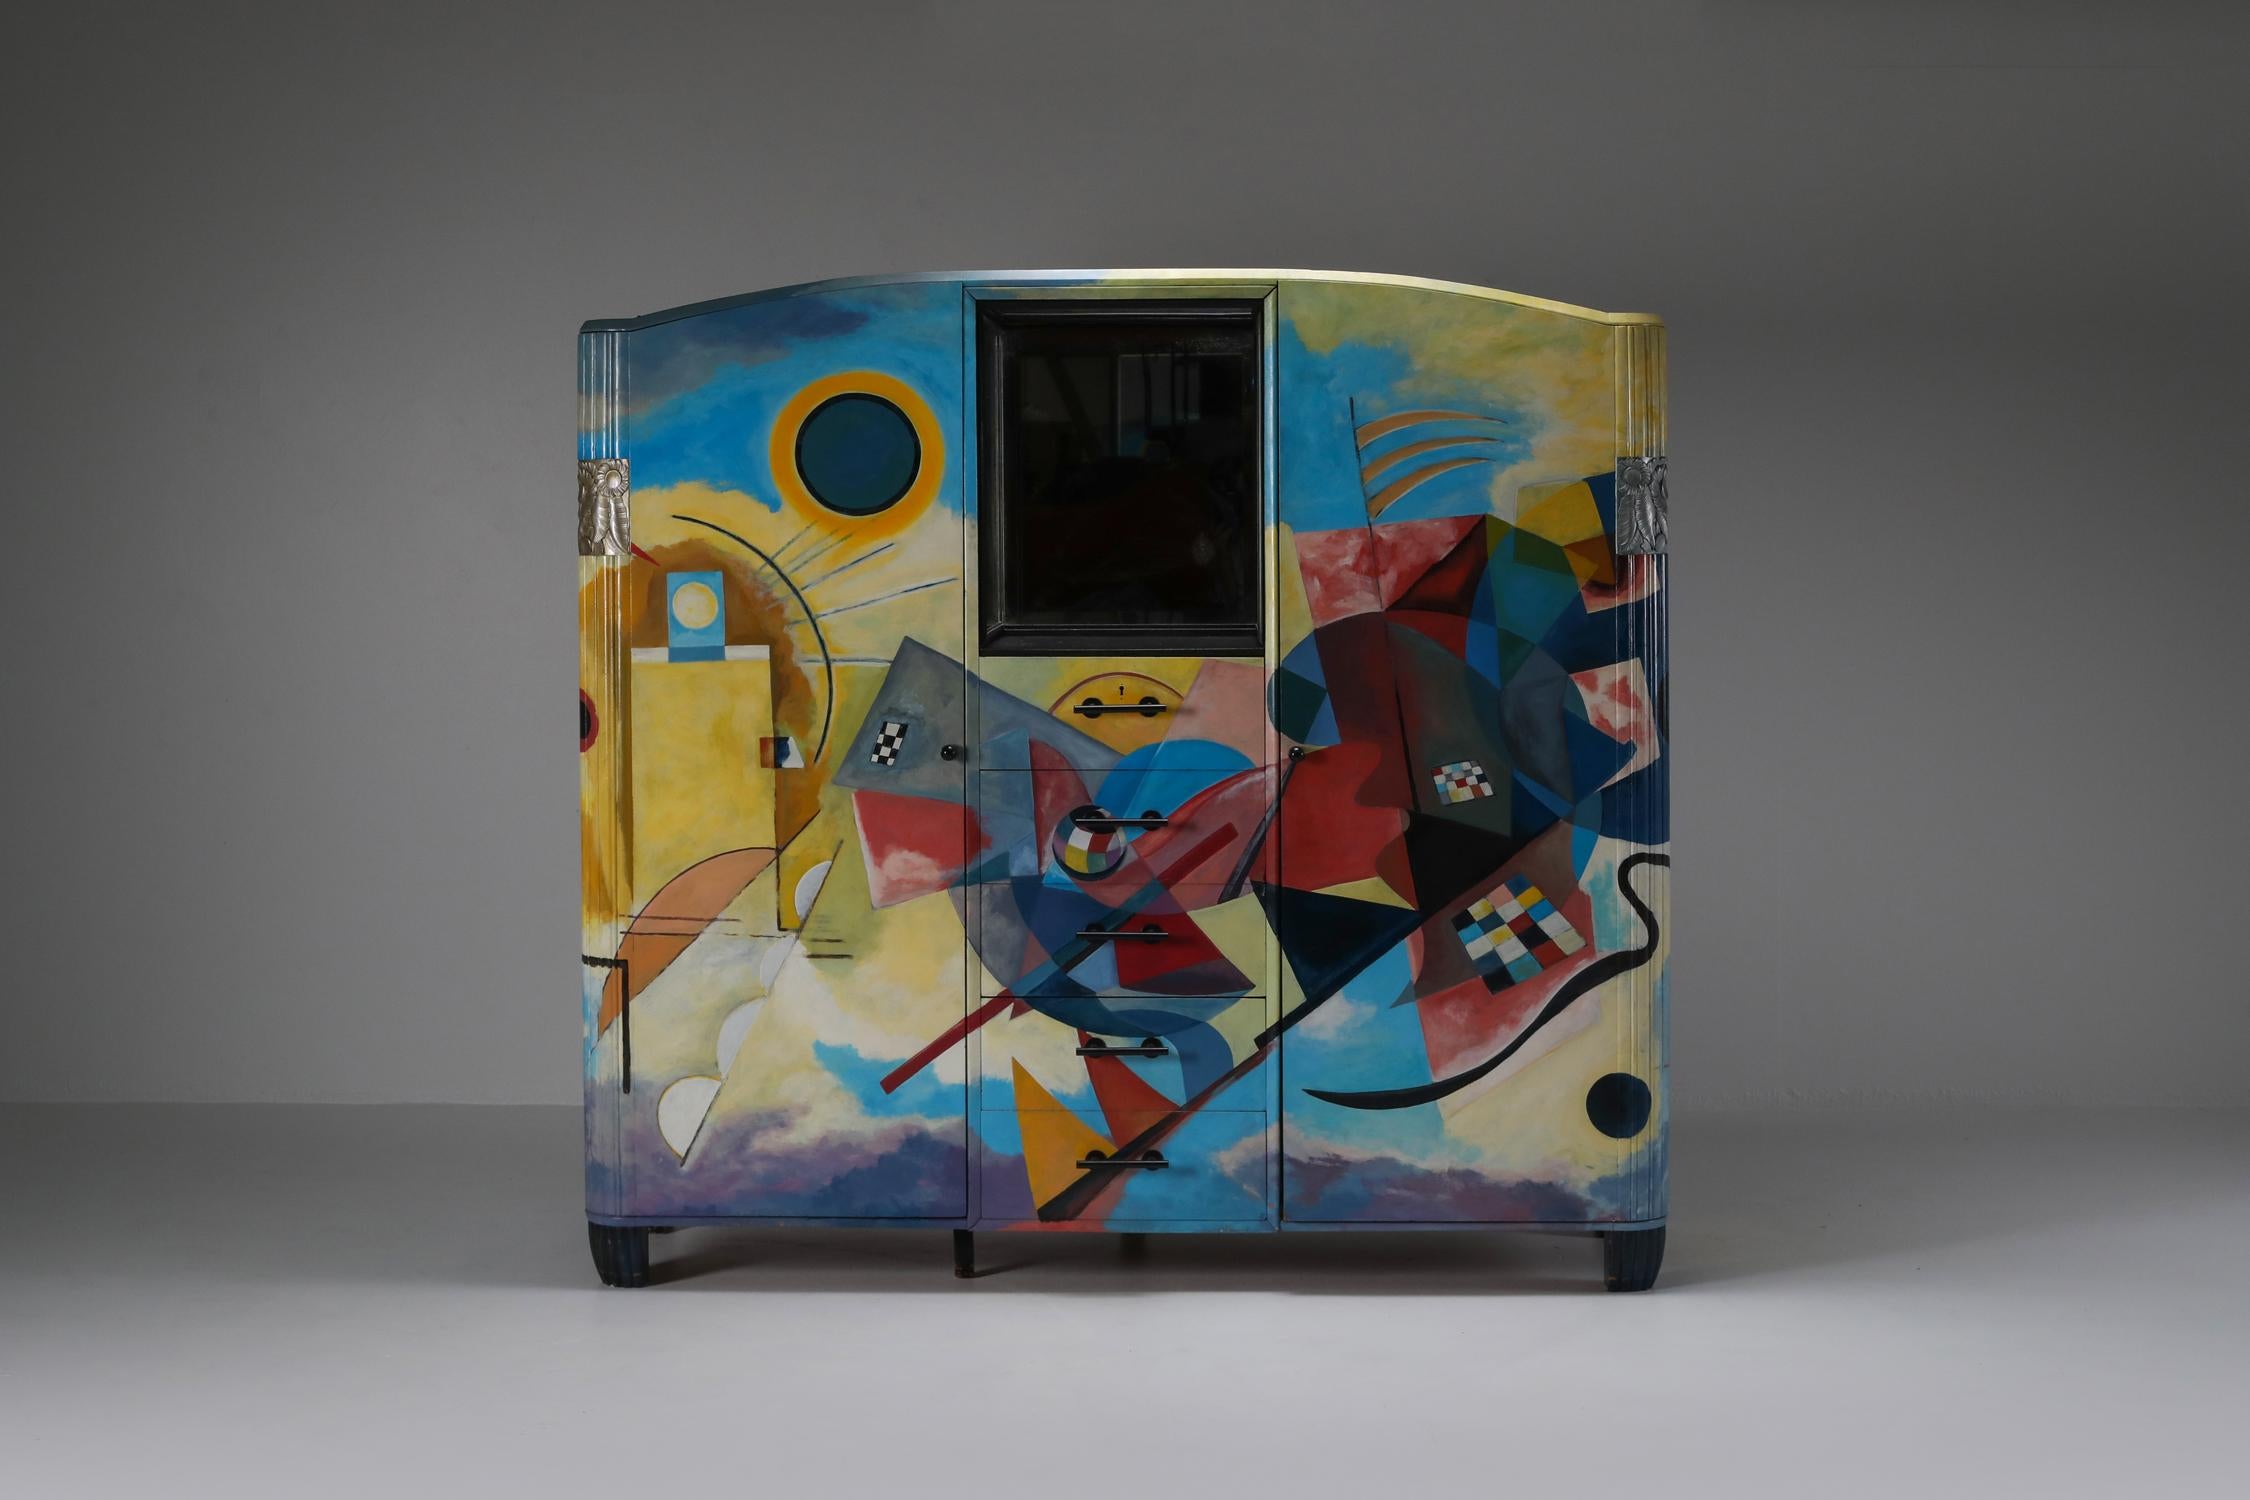 Art Deco cupboard hand painted in the style of Kandinsky, Belgium 

There's a true art history story to be told through this piece.
In the time of his Avant Garde art space, Peers painted this storage piece in the manner of Kandinsky to be able